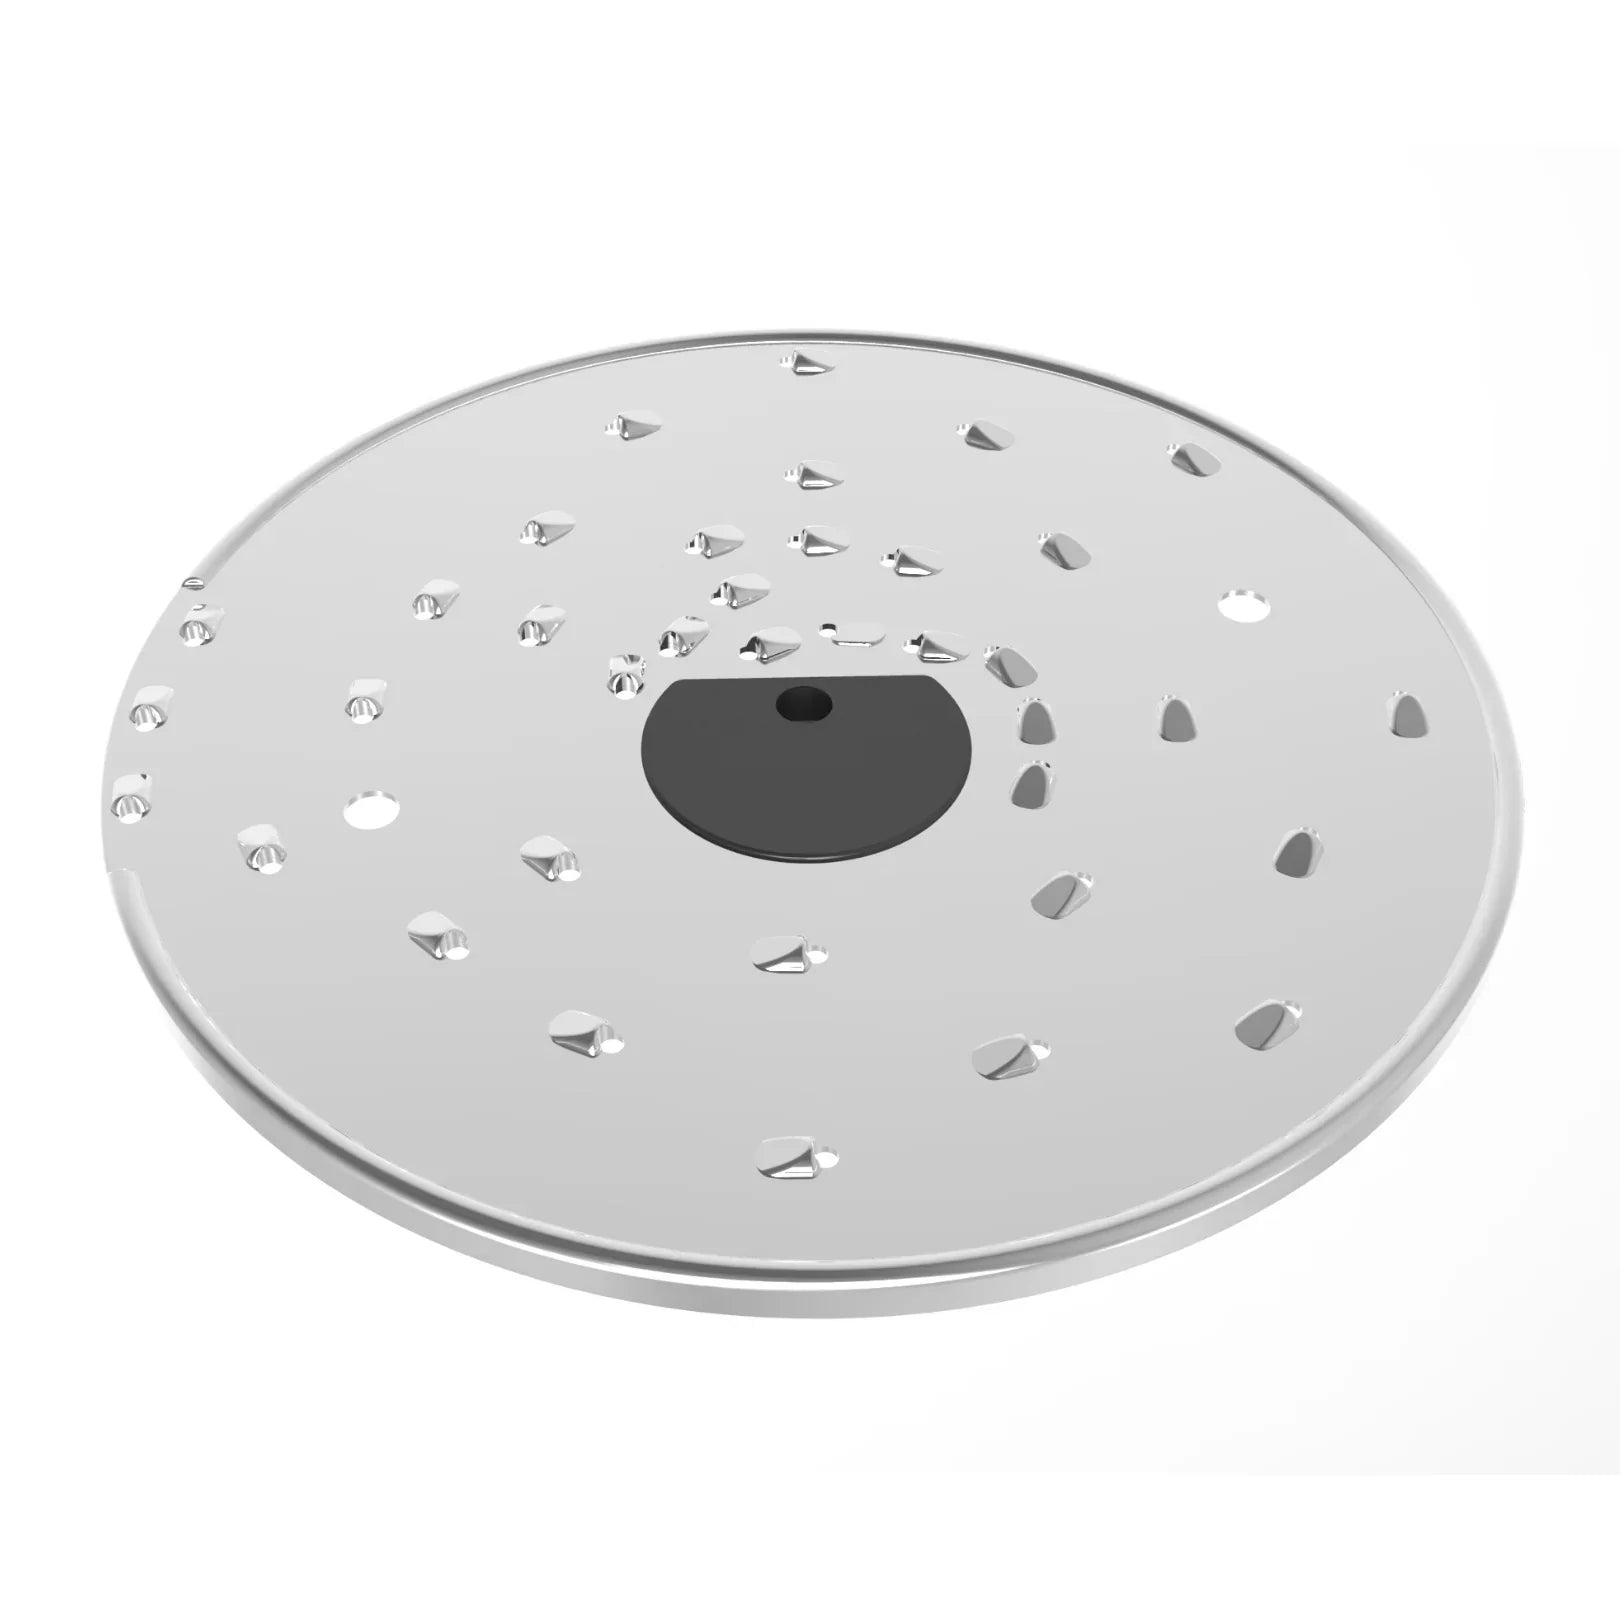 Grating disc for the magimix food processor